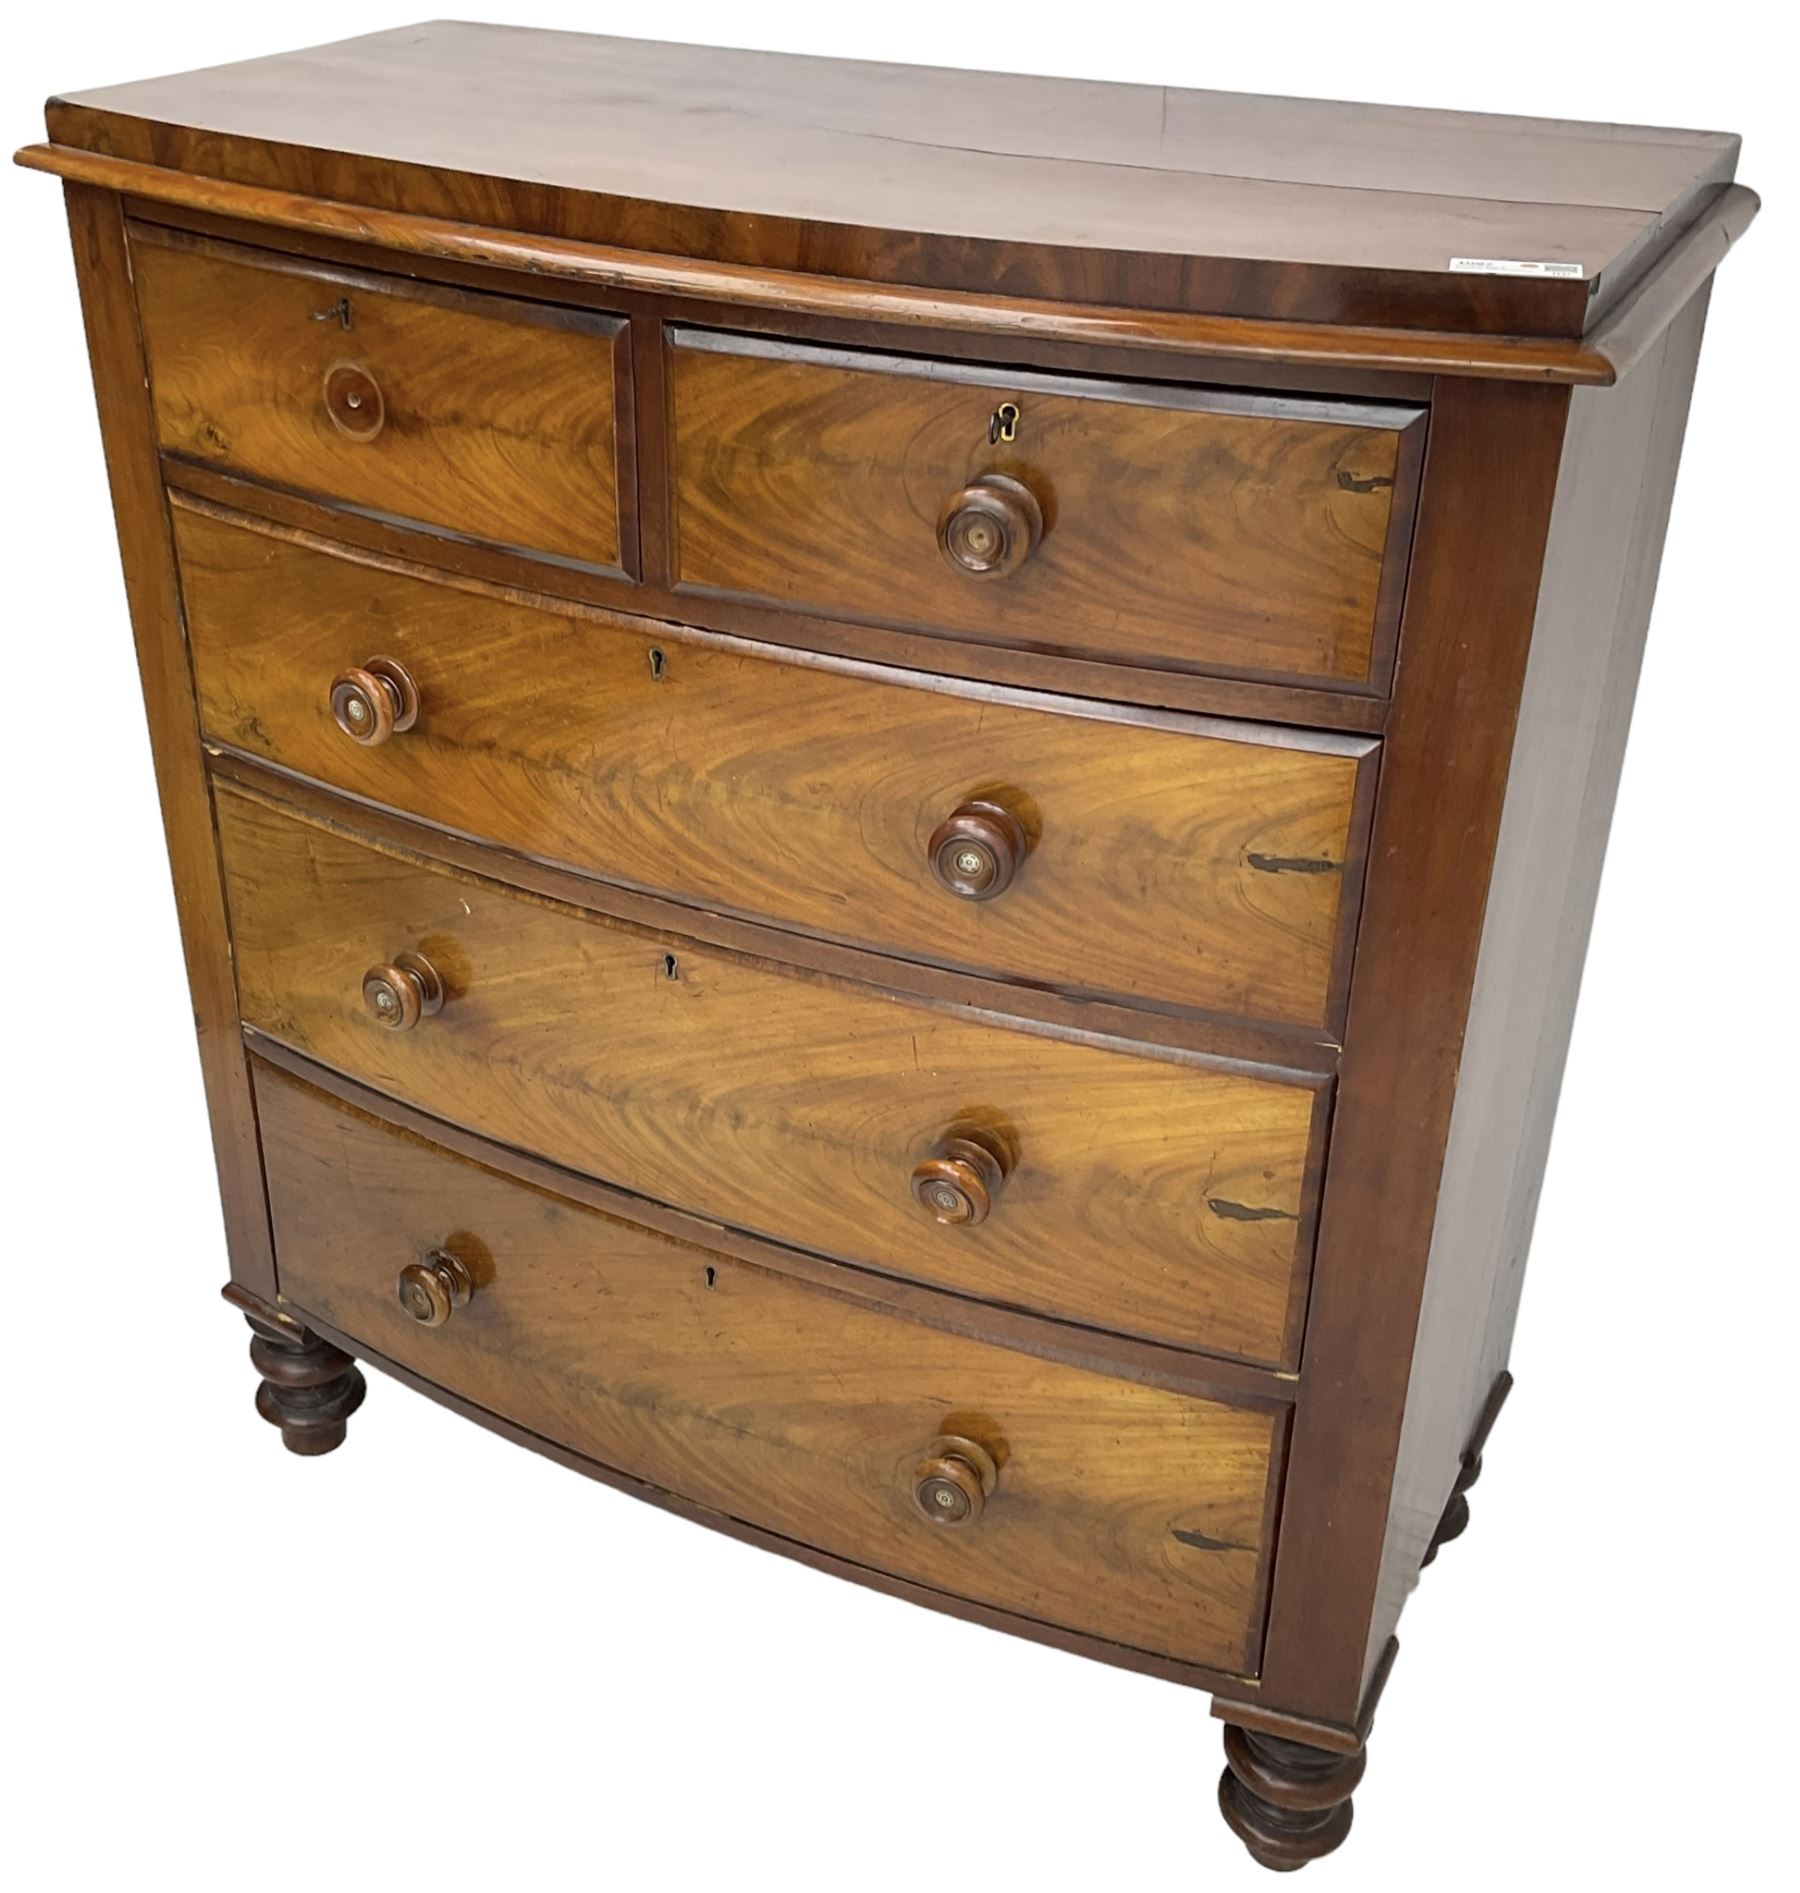 Victorian mahogany bow-front chest - Image 4 of 8